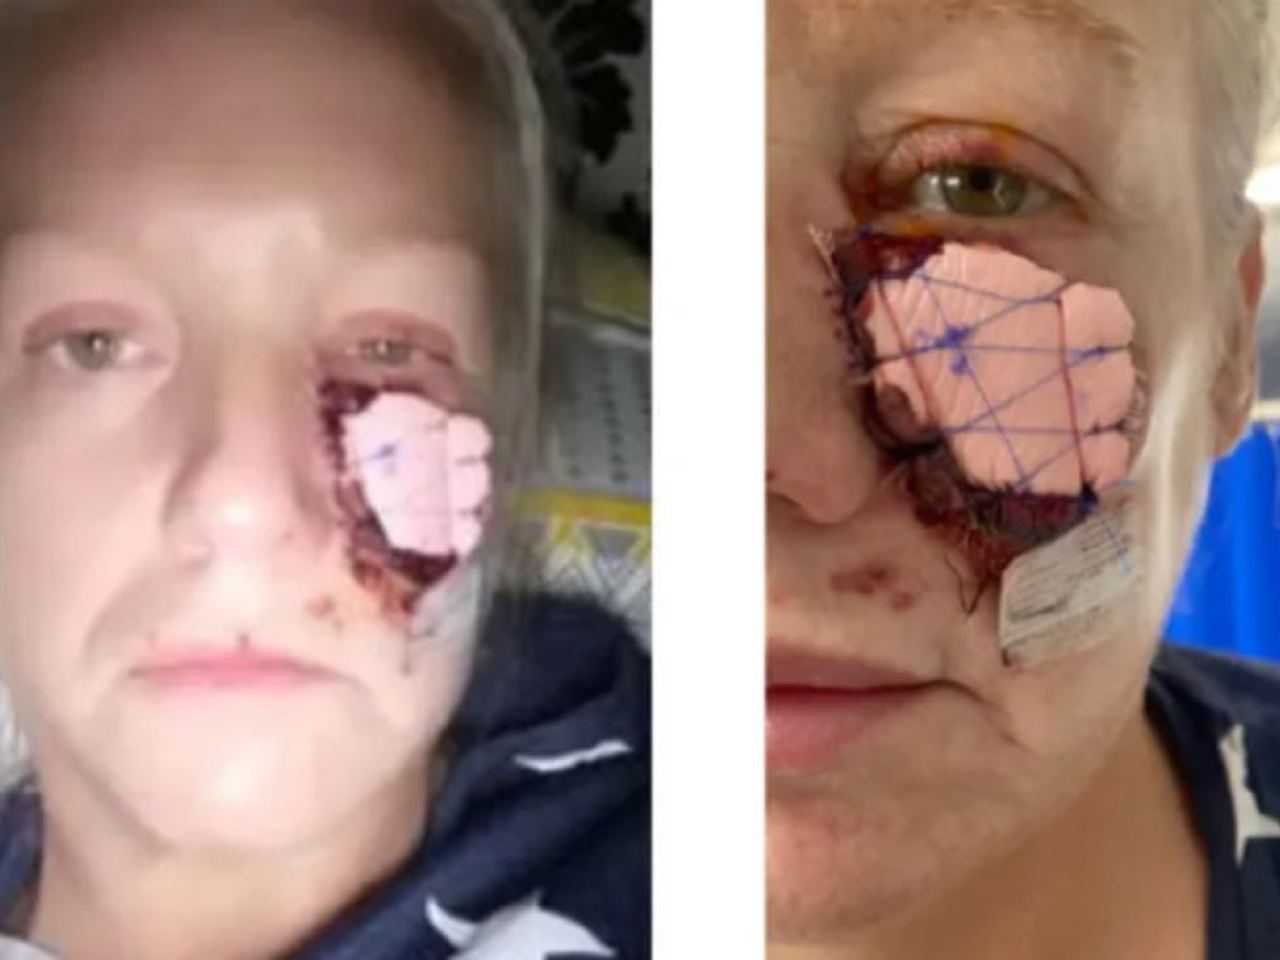 Cute dog bites woman's face and eats it: 'It ruined my life'